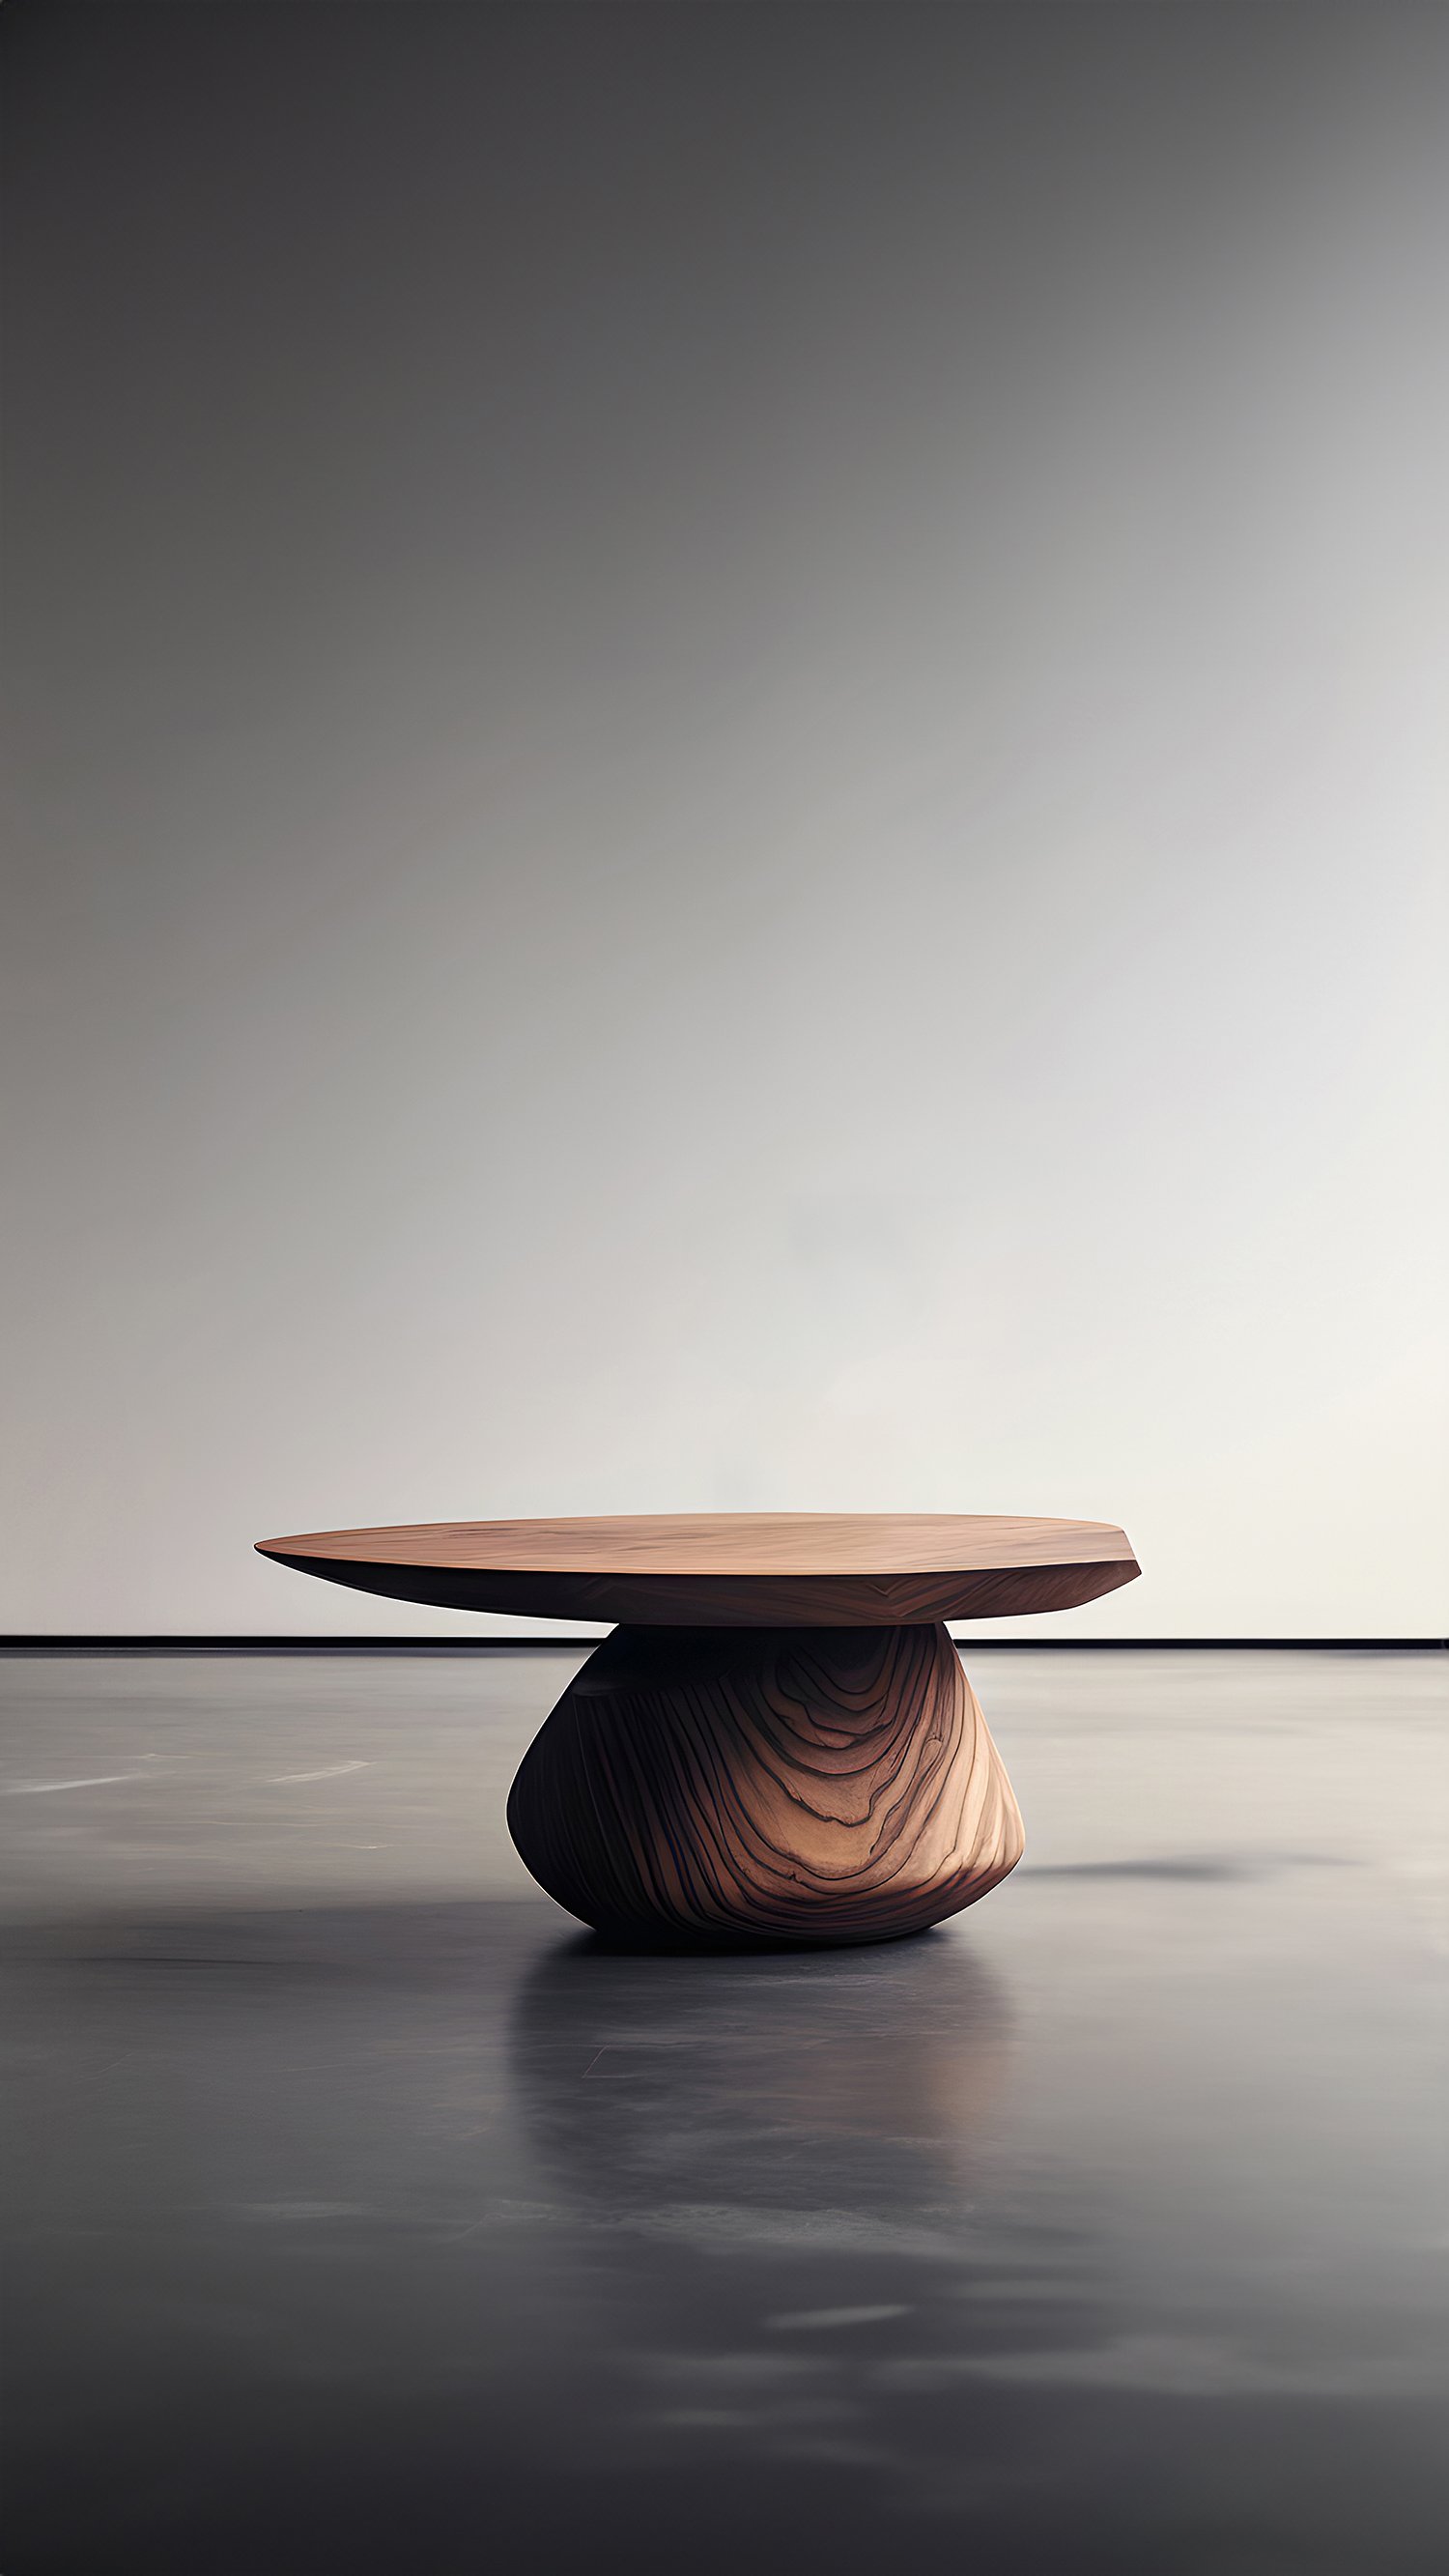 Sculptural Coffee Table Made of Solid Wood, Center Table Solace S33 by Joel Escalona — 6.jpg